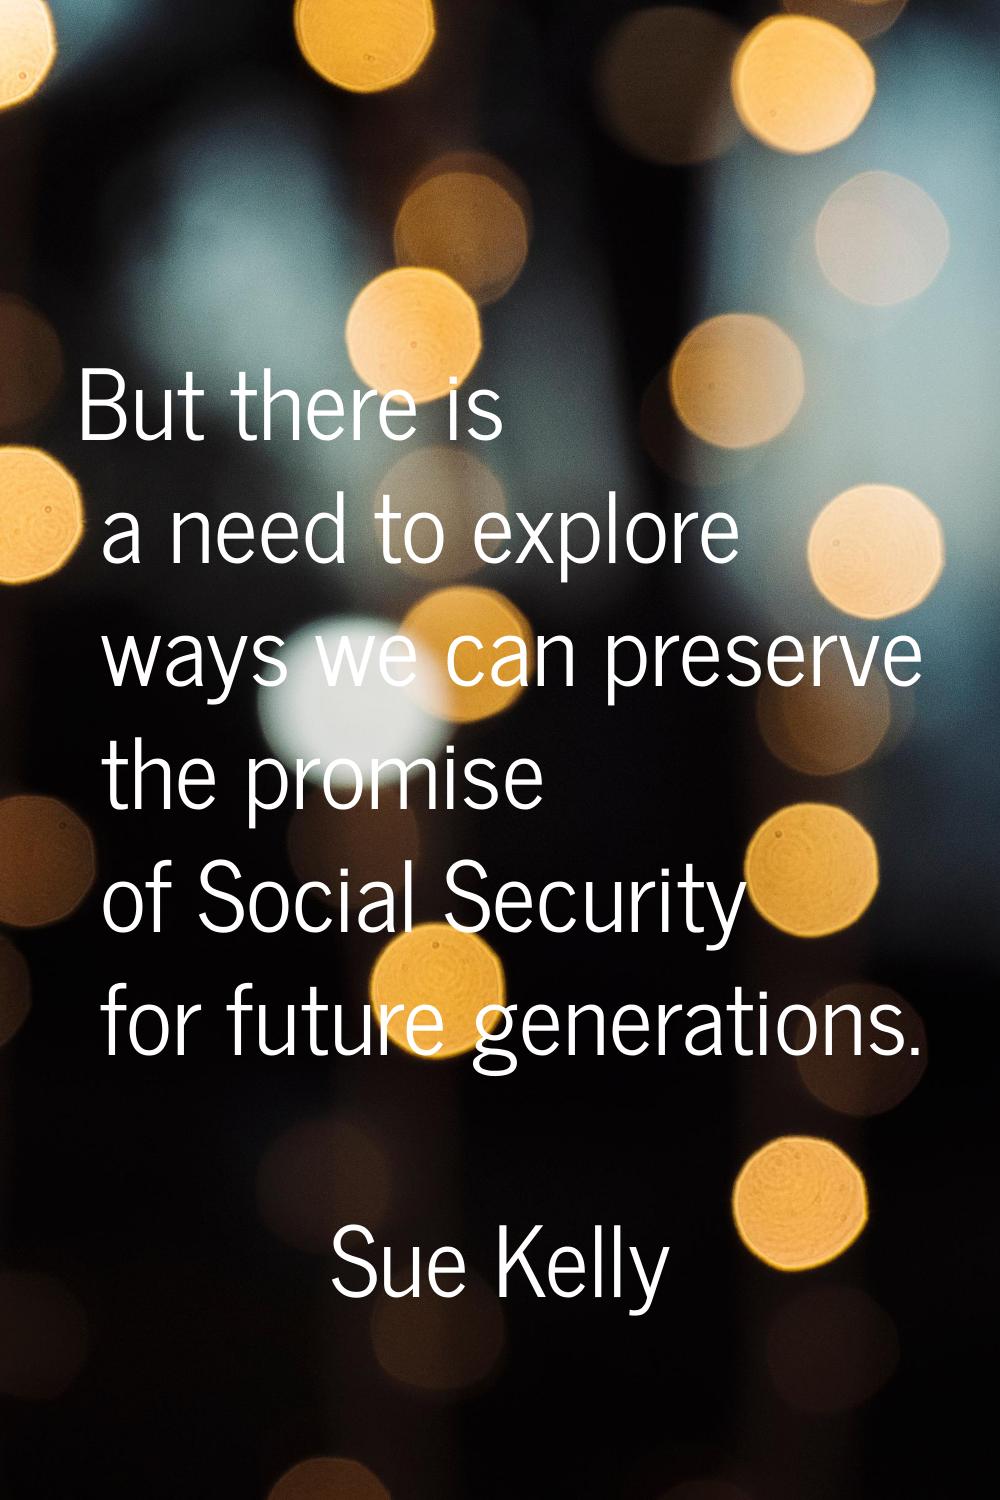 But there is a need to explore ways we can preserve the promise of Social Security for future gener